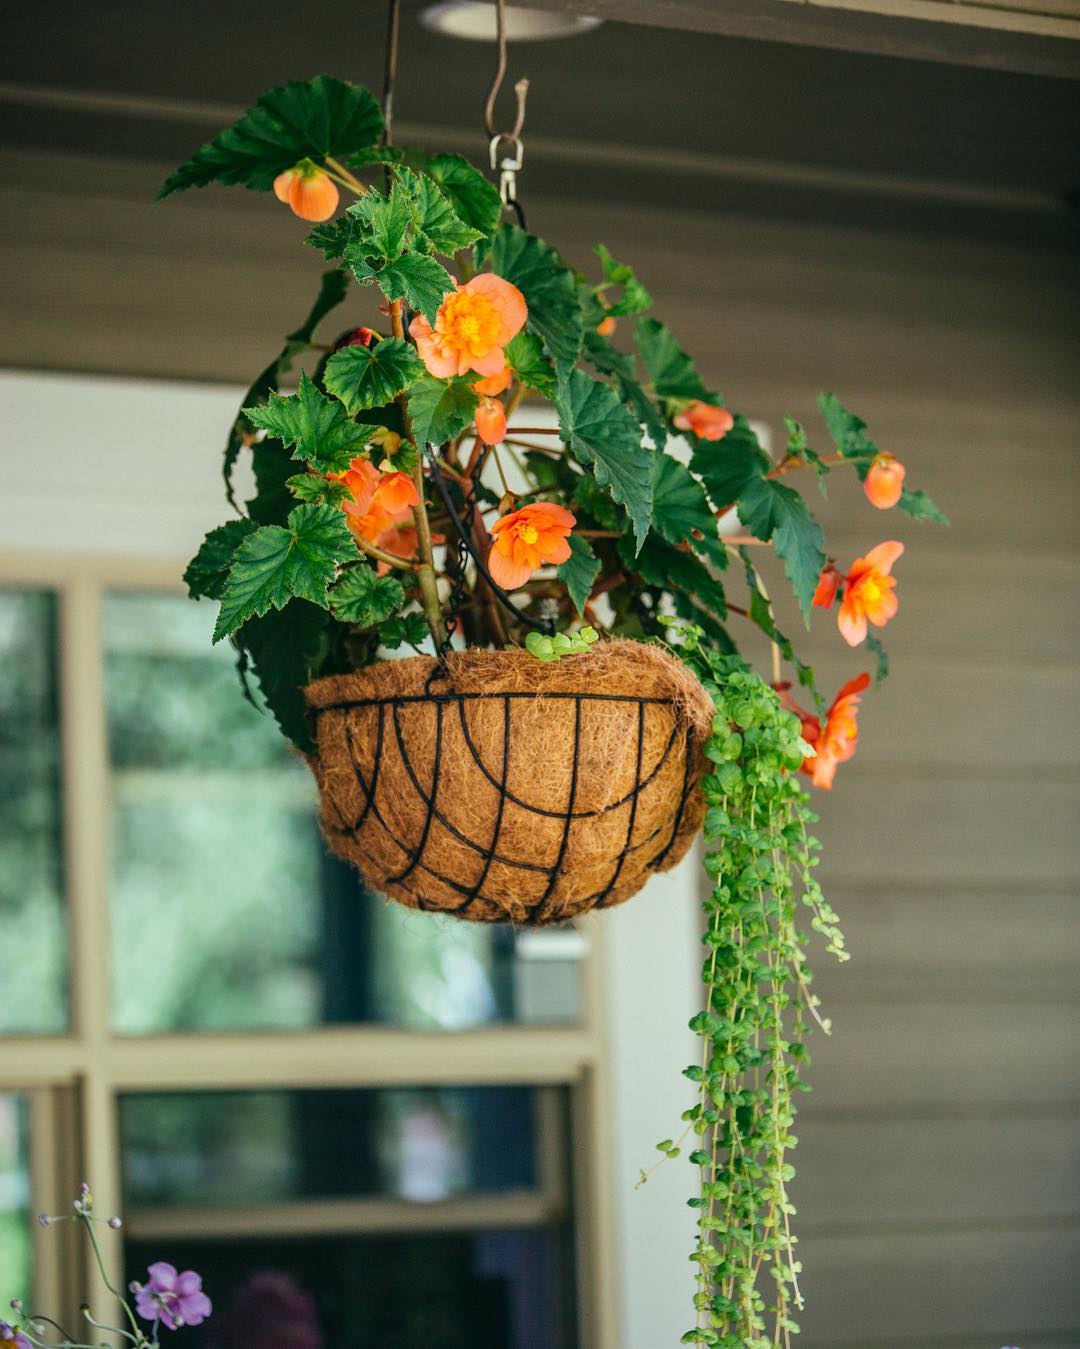 Hanging plant in wire planter. Photo by Instagram user @rexius_landscape